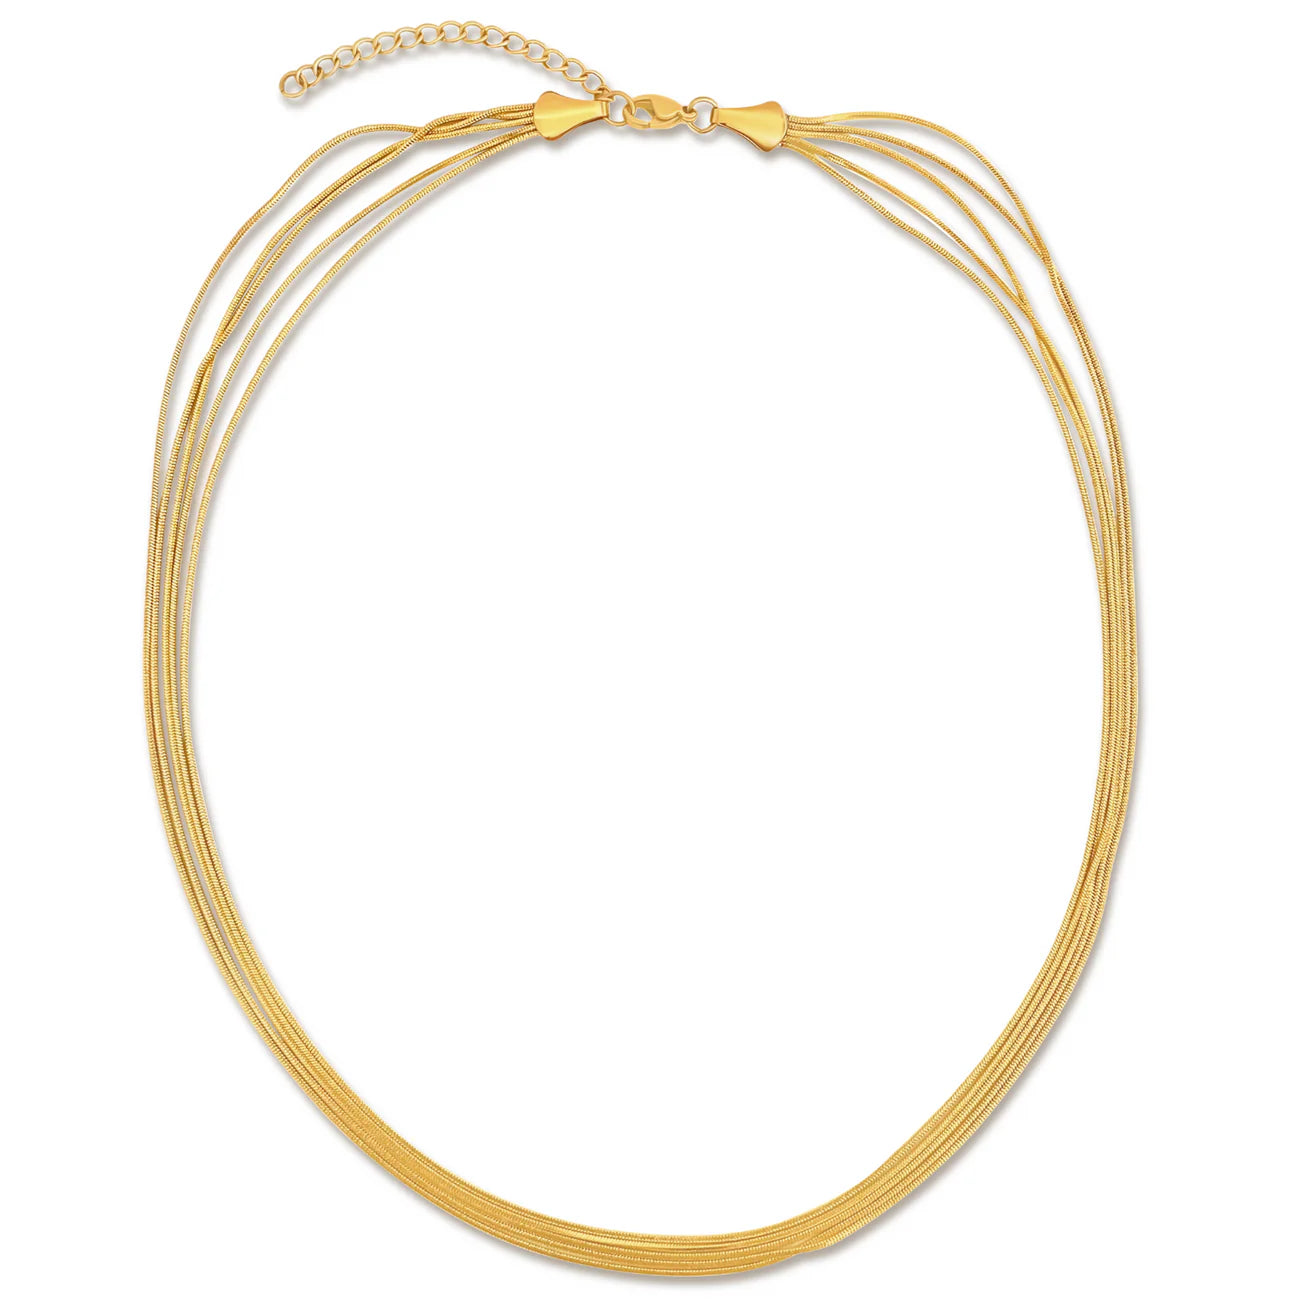 Ellie Vail - Justine Layered Chain Necklace